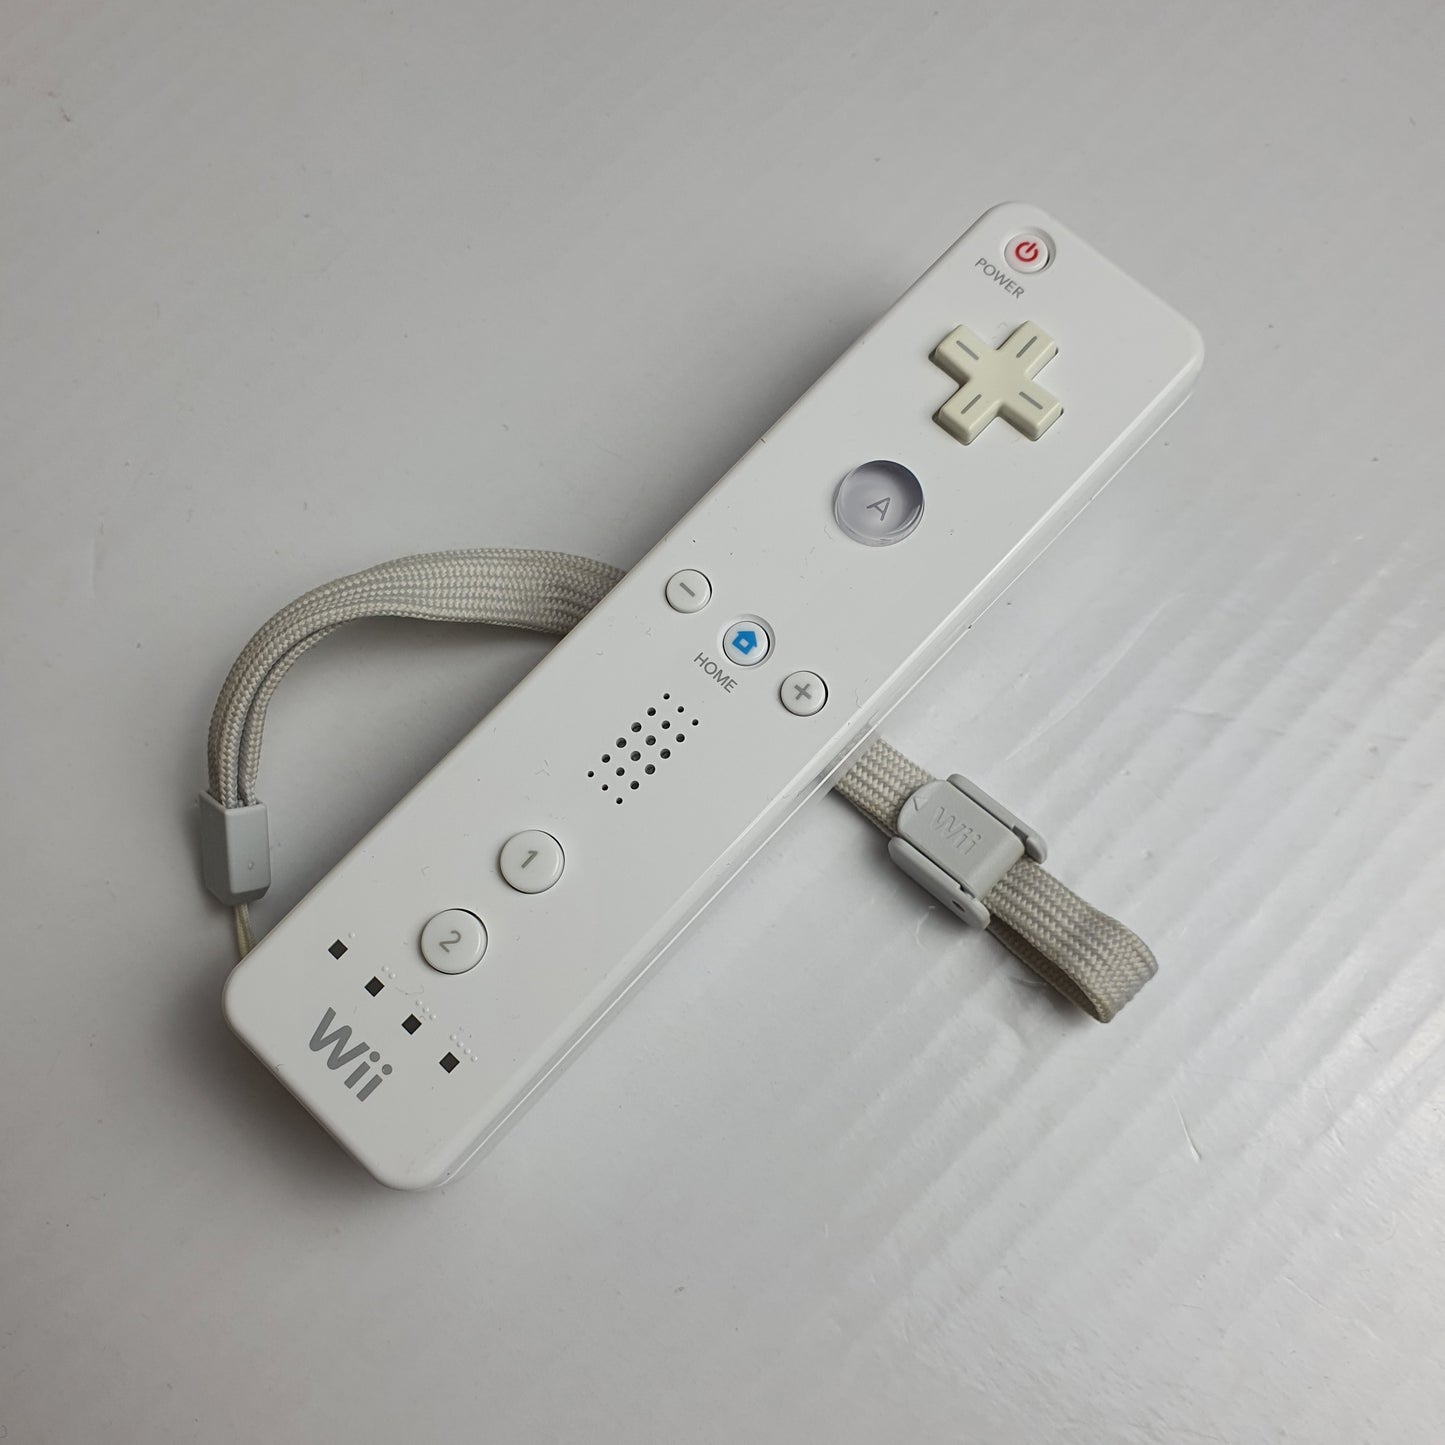 Official Nintendo Wii Wireless Remote